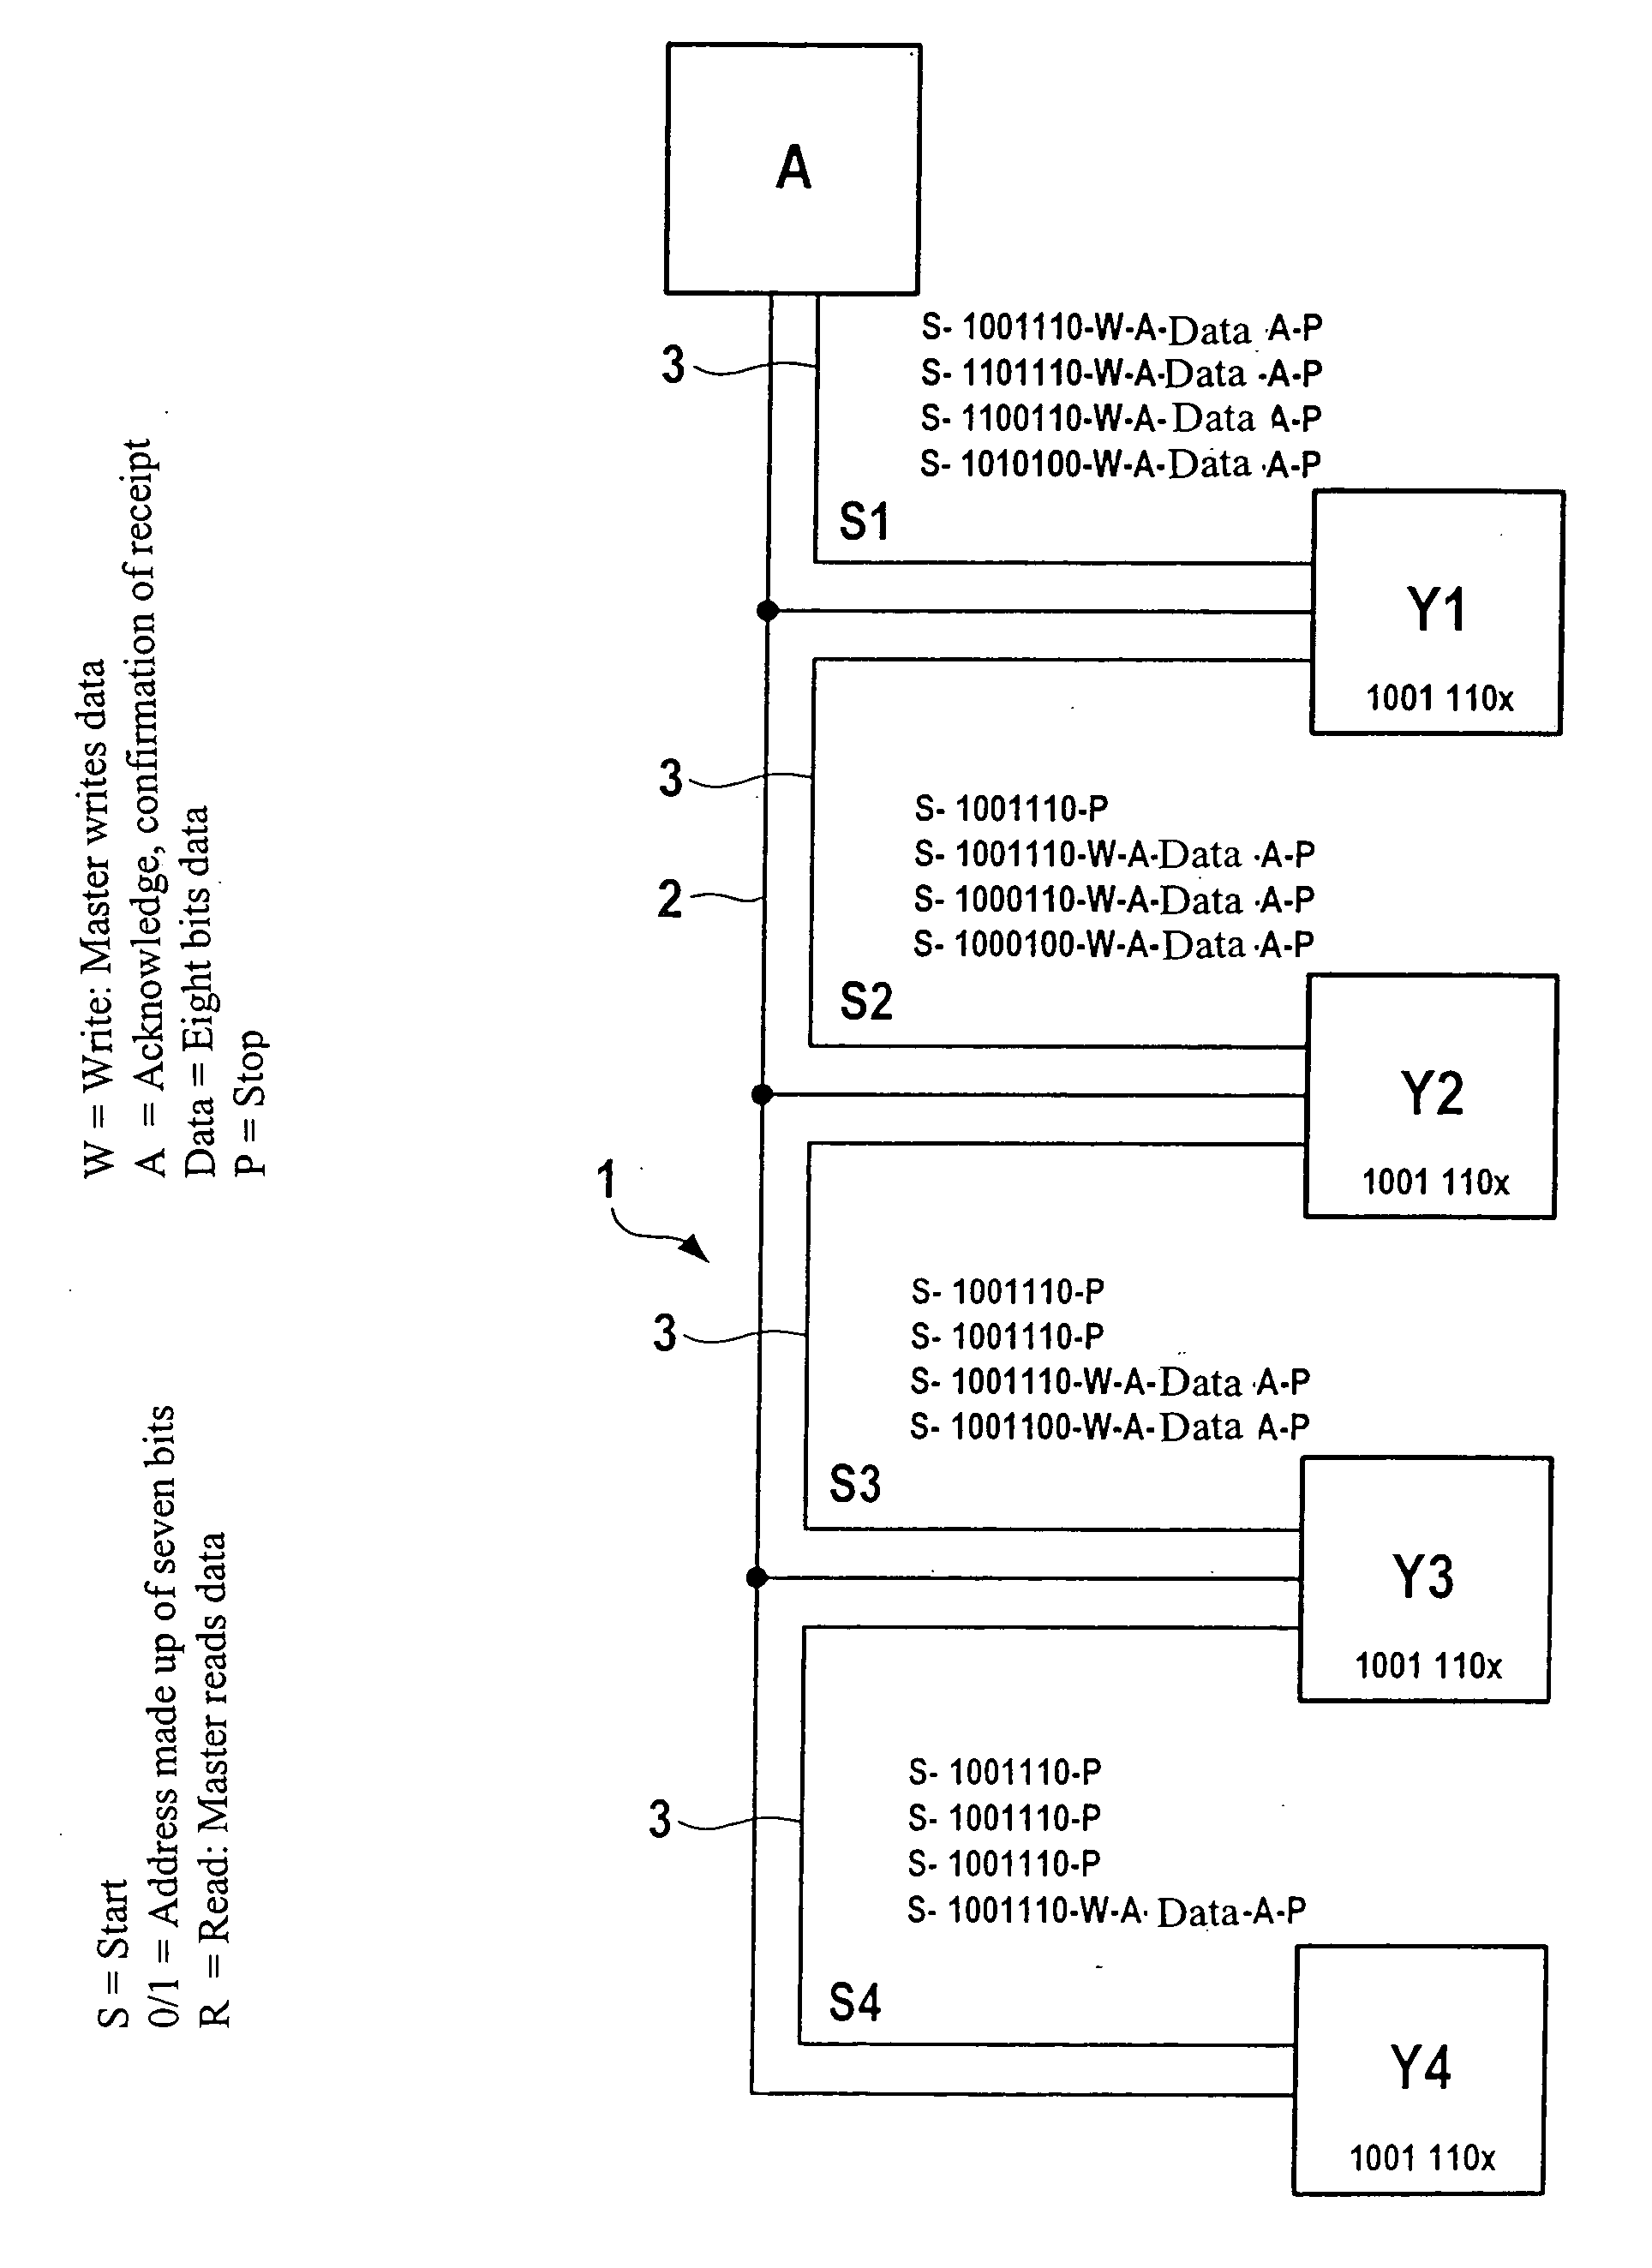 Method for operating a plurality of subscribers connected to a serial bus